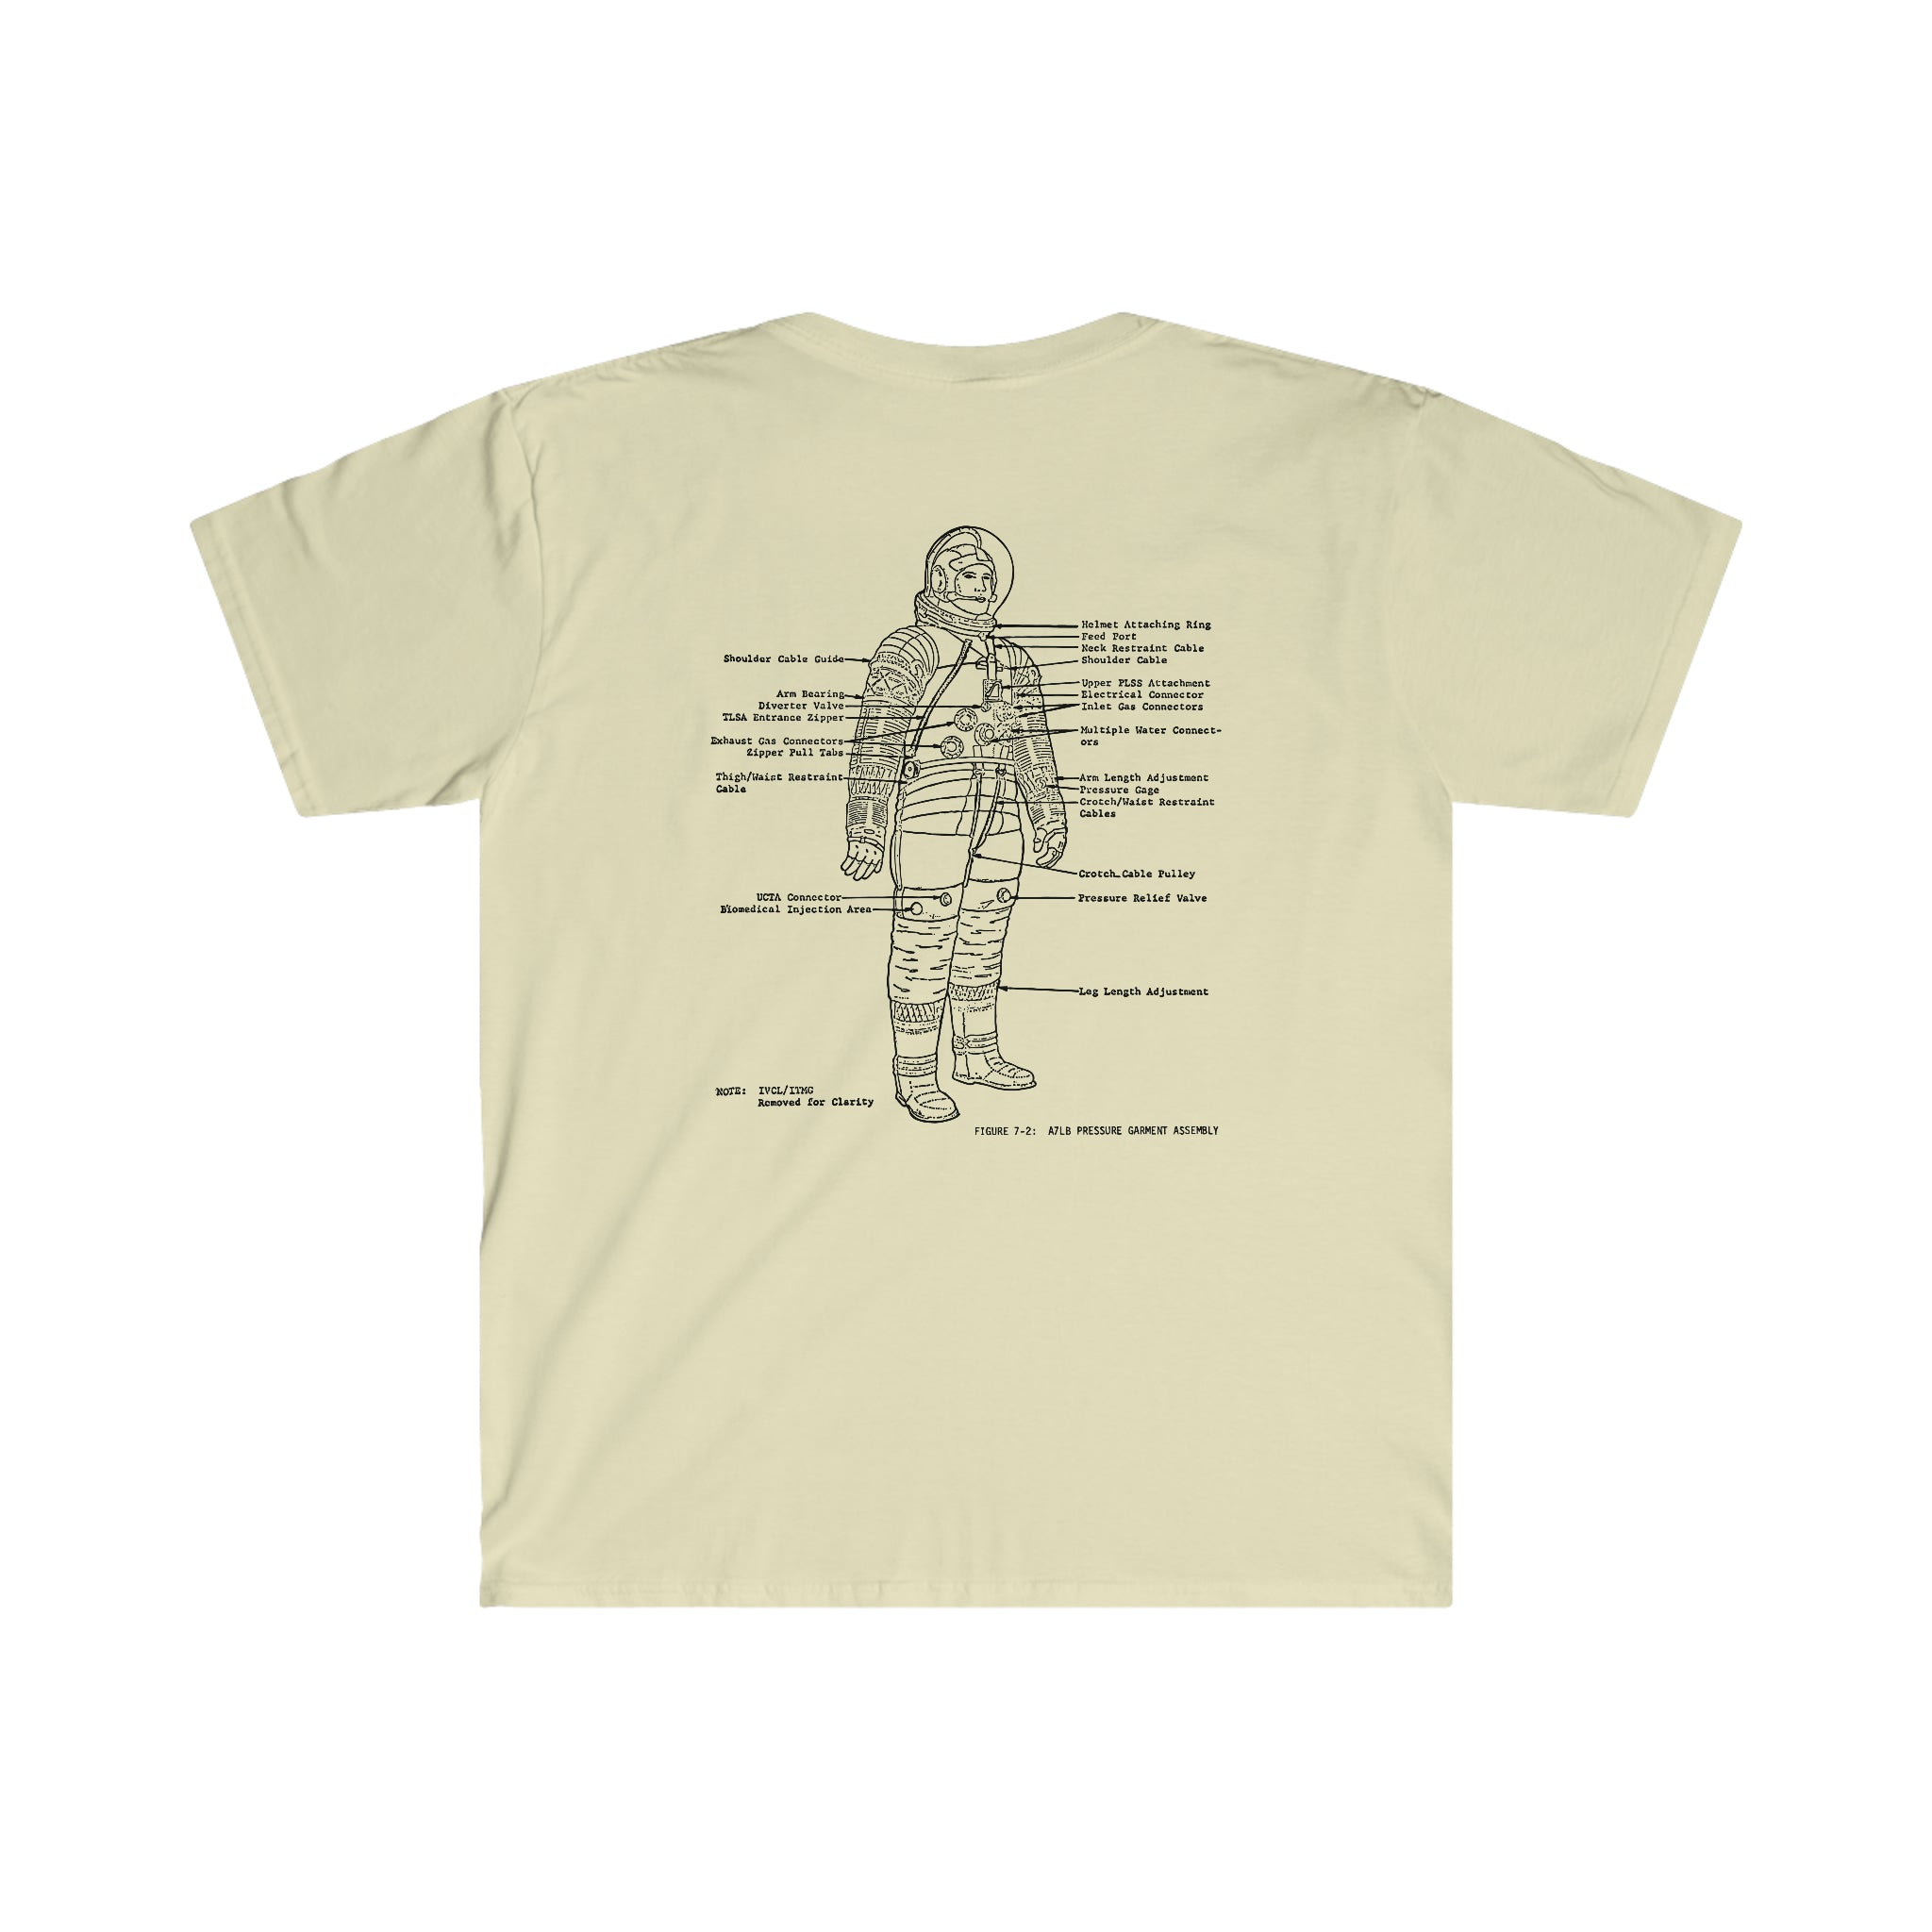 A Save Me From Space T-Shirt featuring an illustration of a space suit.